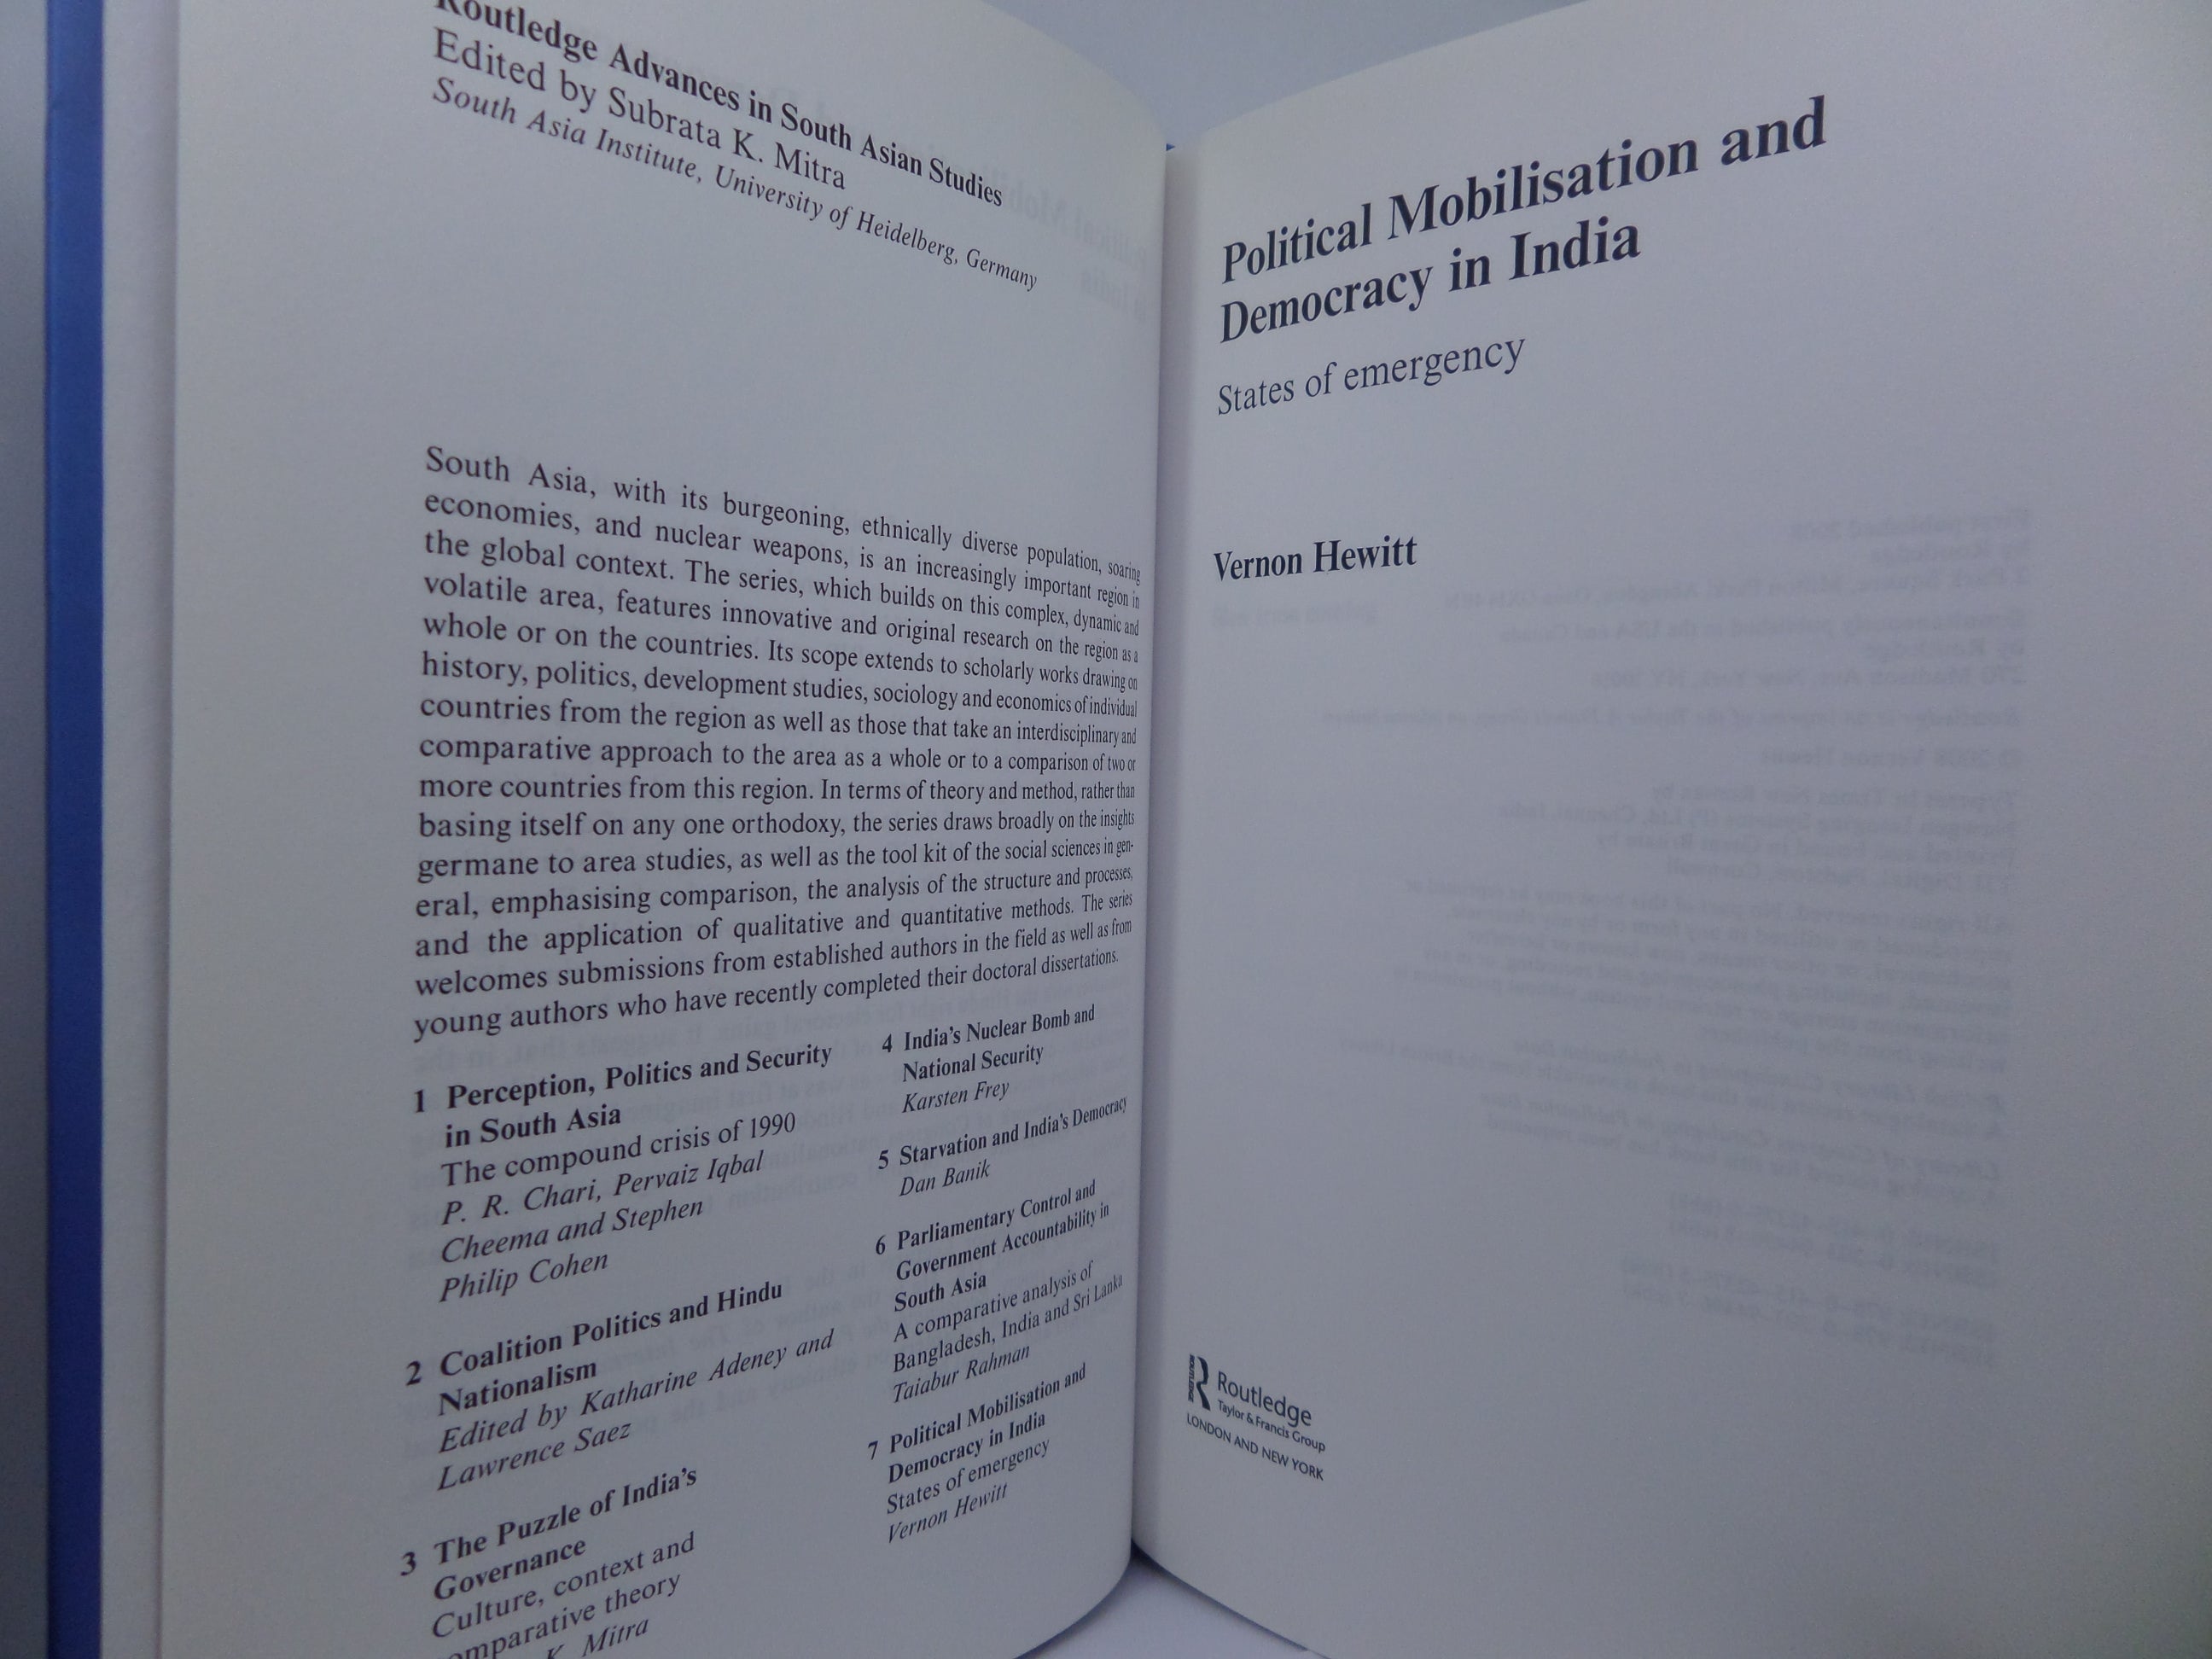 POLITICAL MOBILISATION AND DEMOCRACY IN INDIA BY VERNON HEWITT 2008 HARDCOVER.